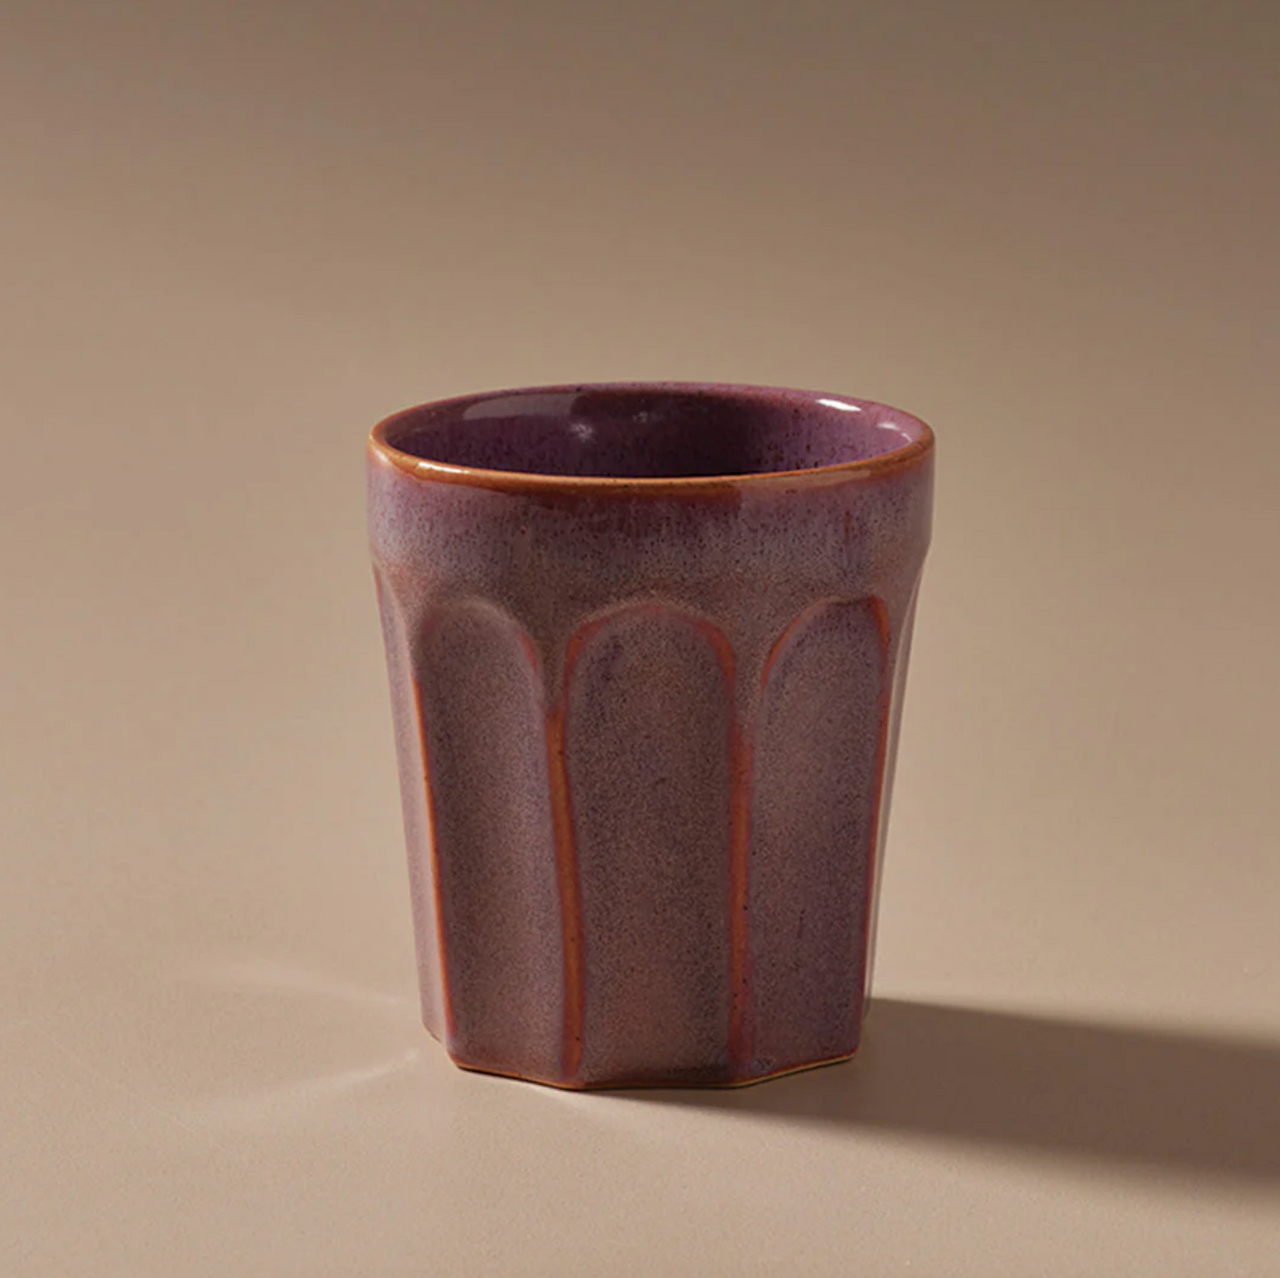 A small Indigo Love Ritual Latte Cup sitting on a beige surface.